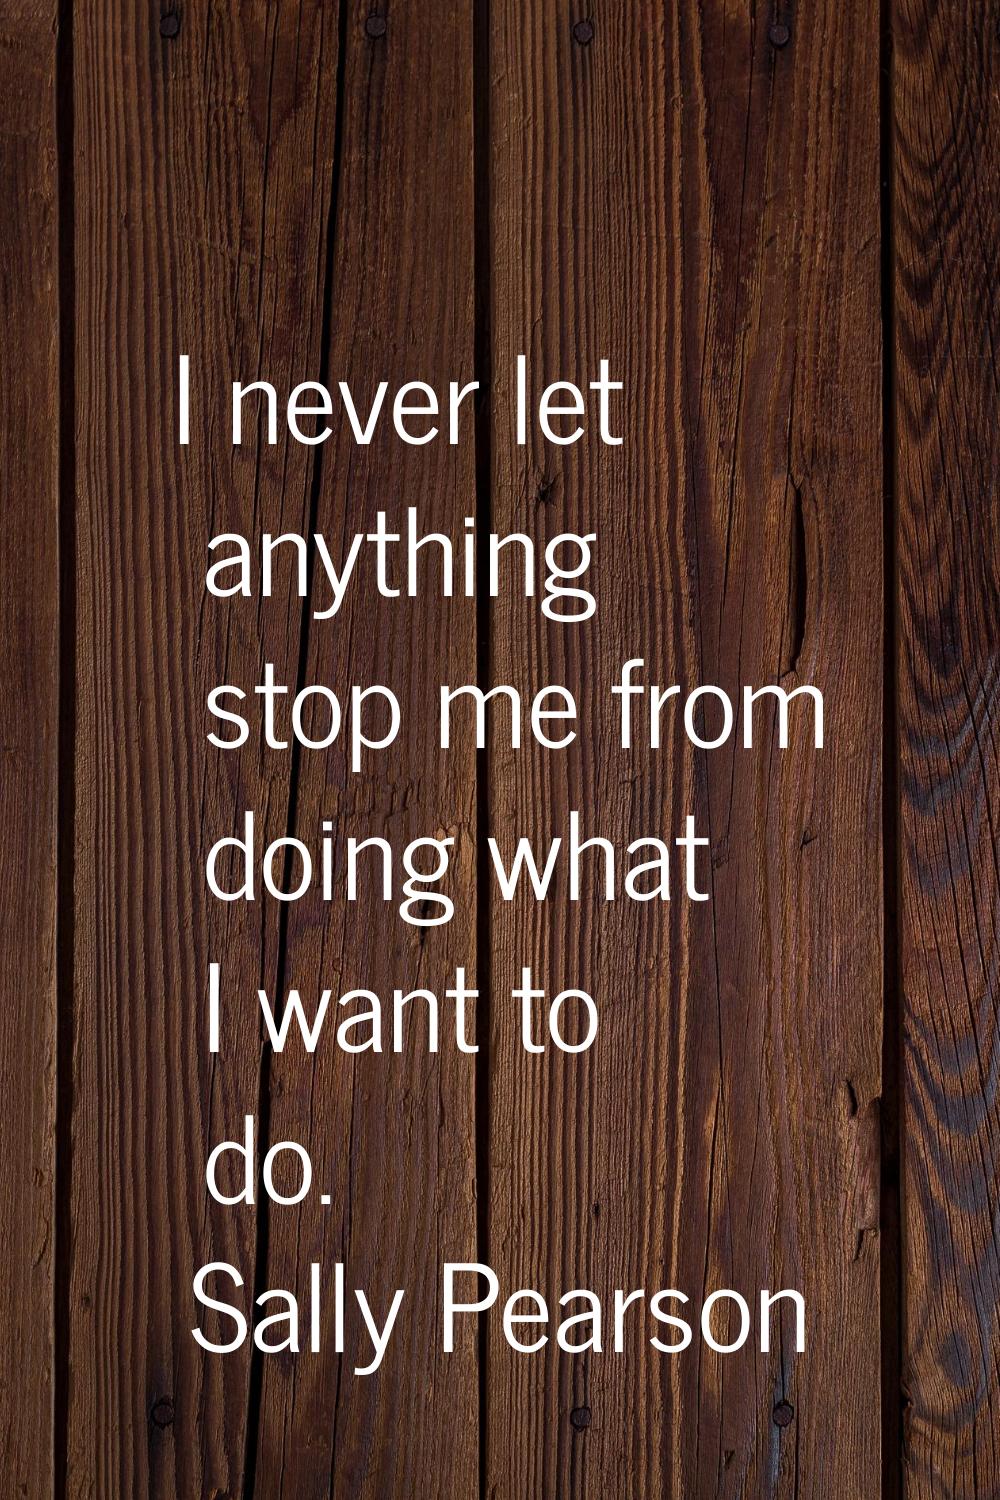 I never let anything stop me from doing what I want to do.